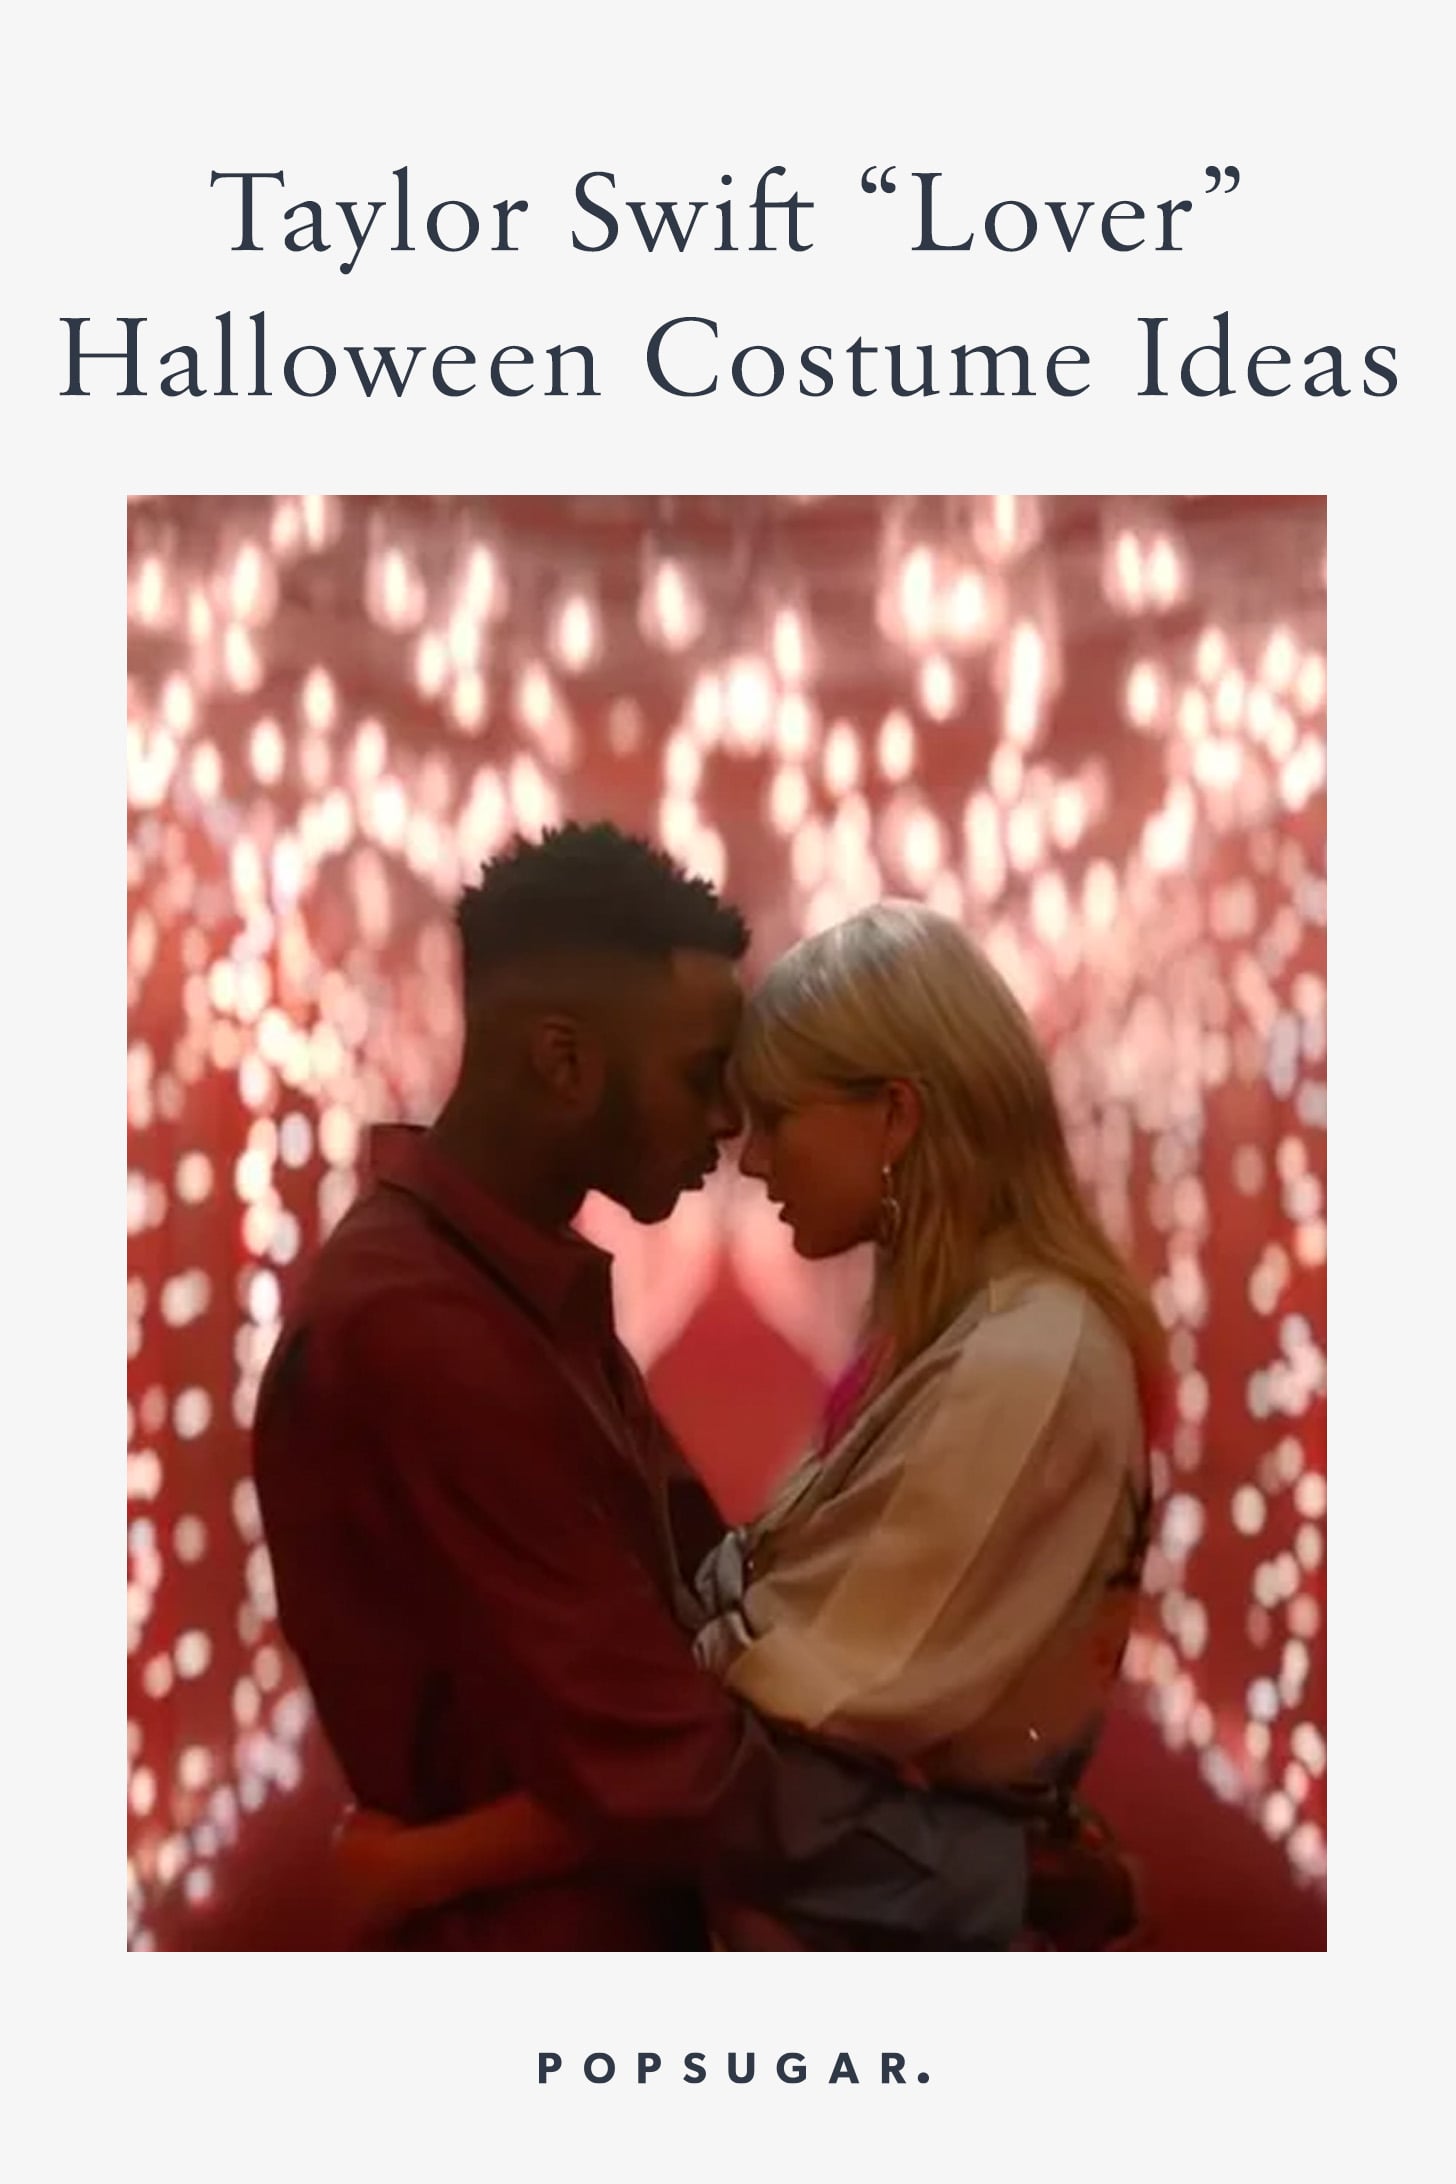 15 Halloween Costume Ideas Inspired by Taylor Swift